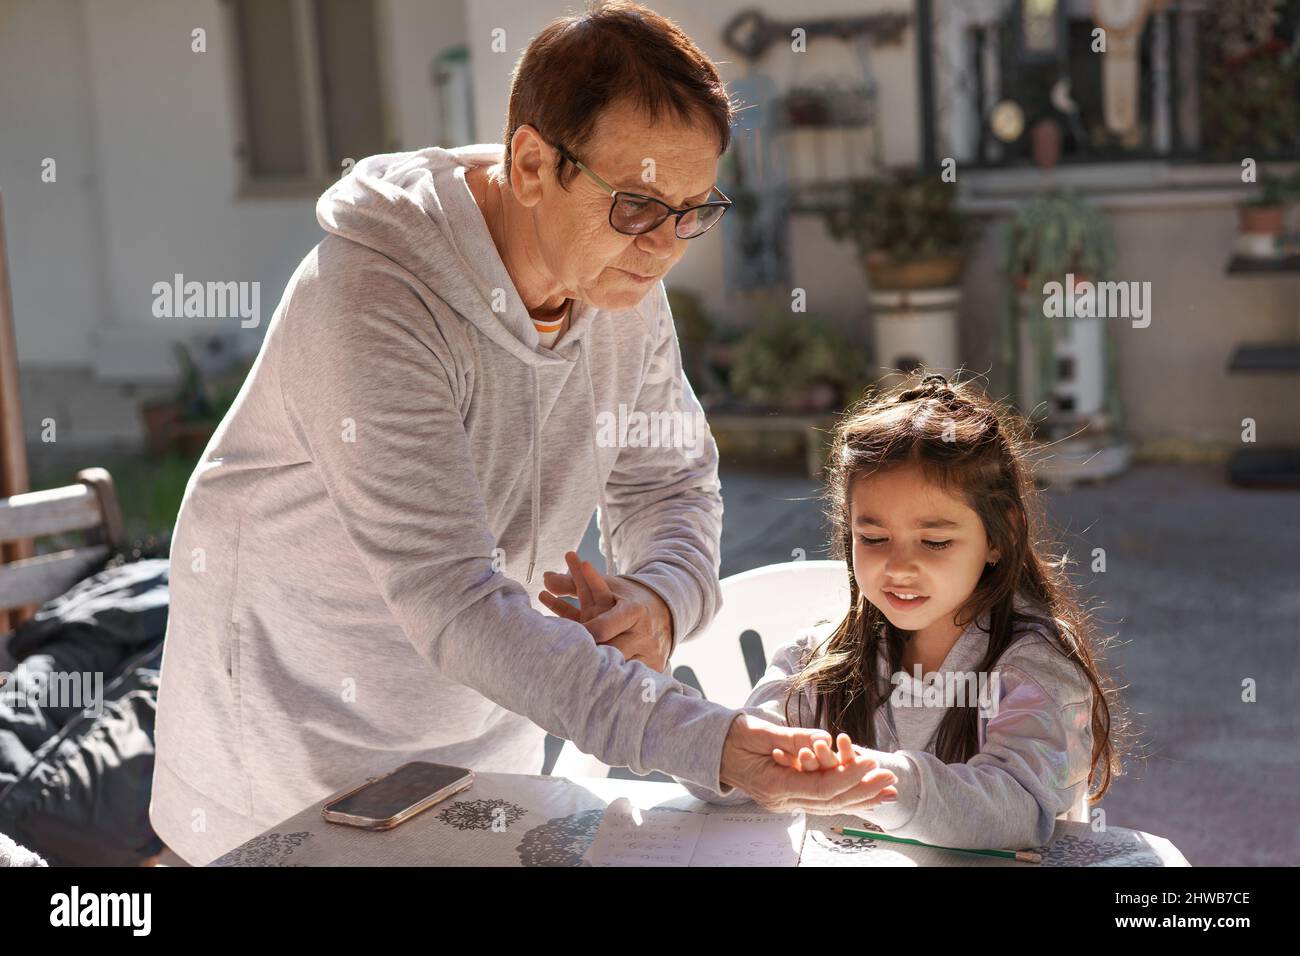 Beautiful girl writing and counting on fingers with the help of her grandmother on an outdoor pergola. Senior teacher supervising little kid doing homework back yard. Happy micro moments of life. Stock Photo